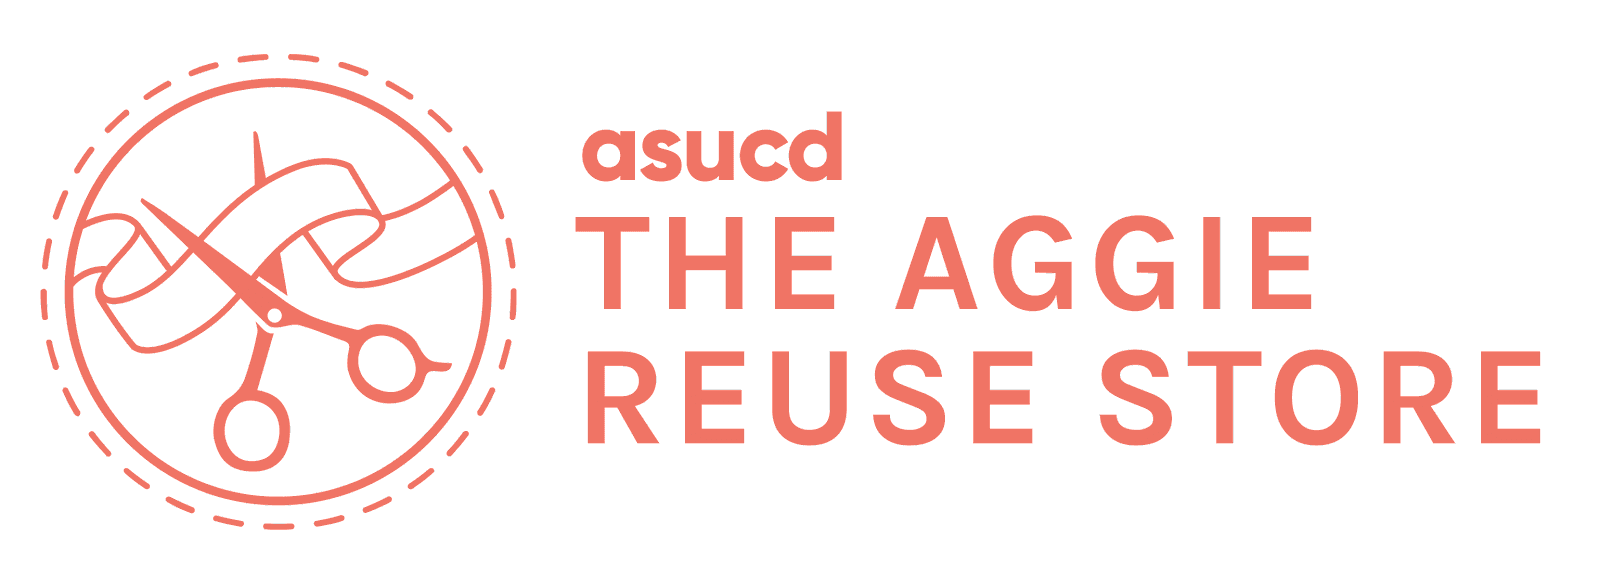 ASUCD The Aggie Reuse Store Logo